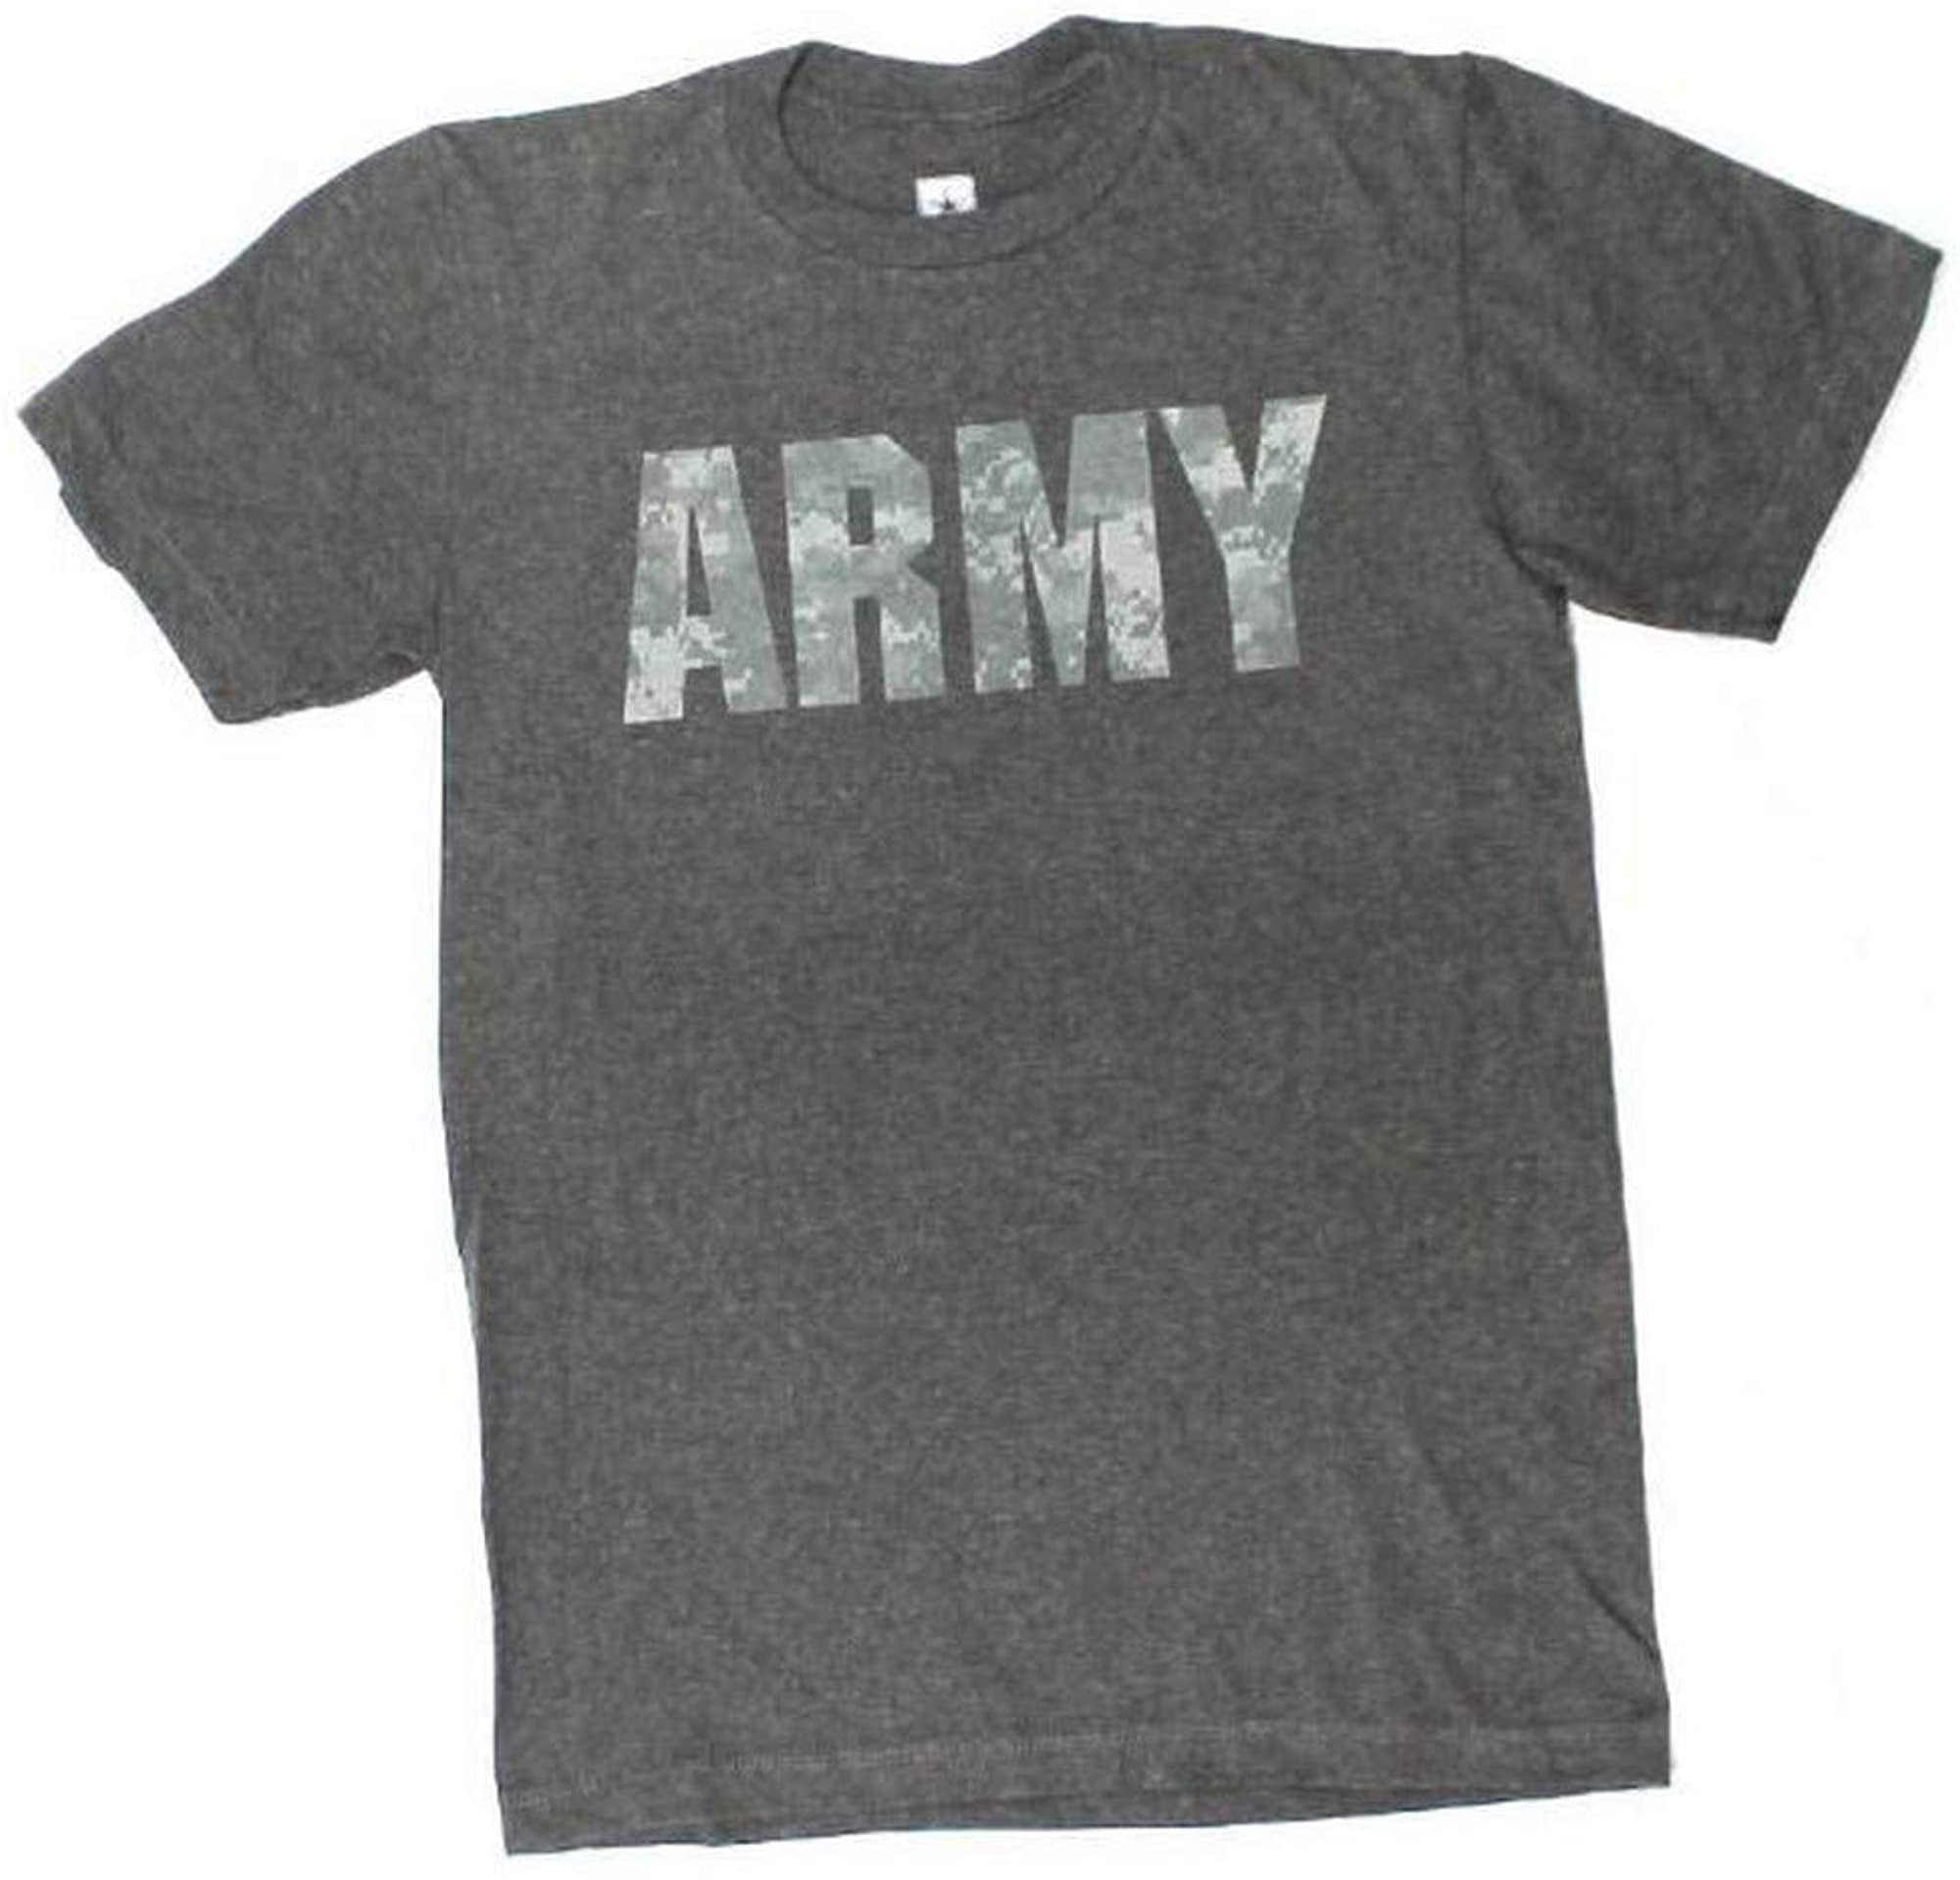 USA Army Logo T-Shirt Camouflage Tee Military Branch Soldier REX ...